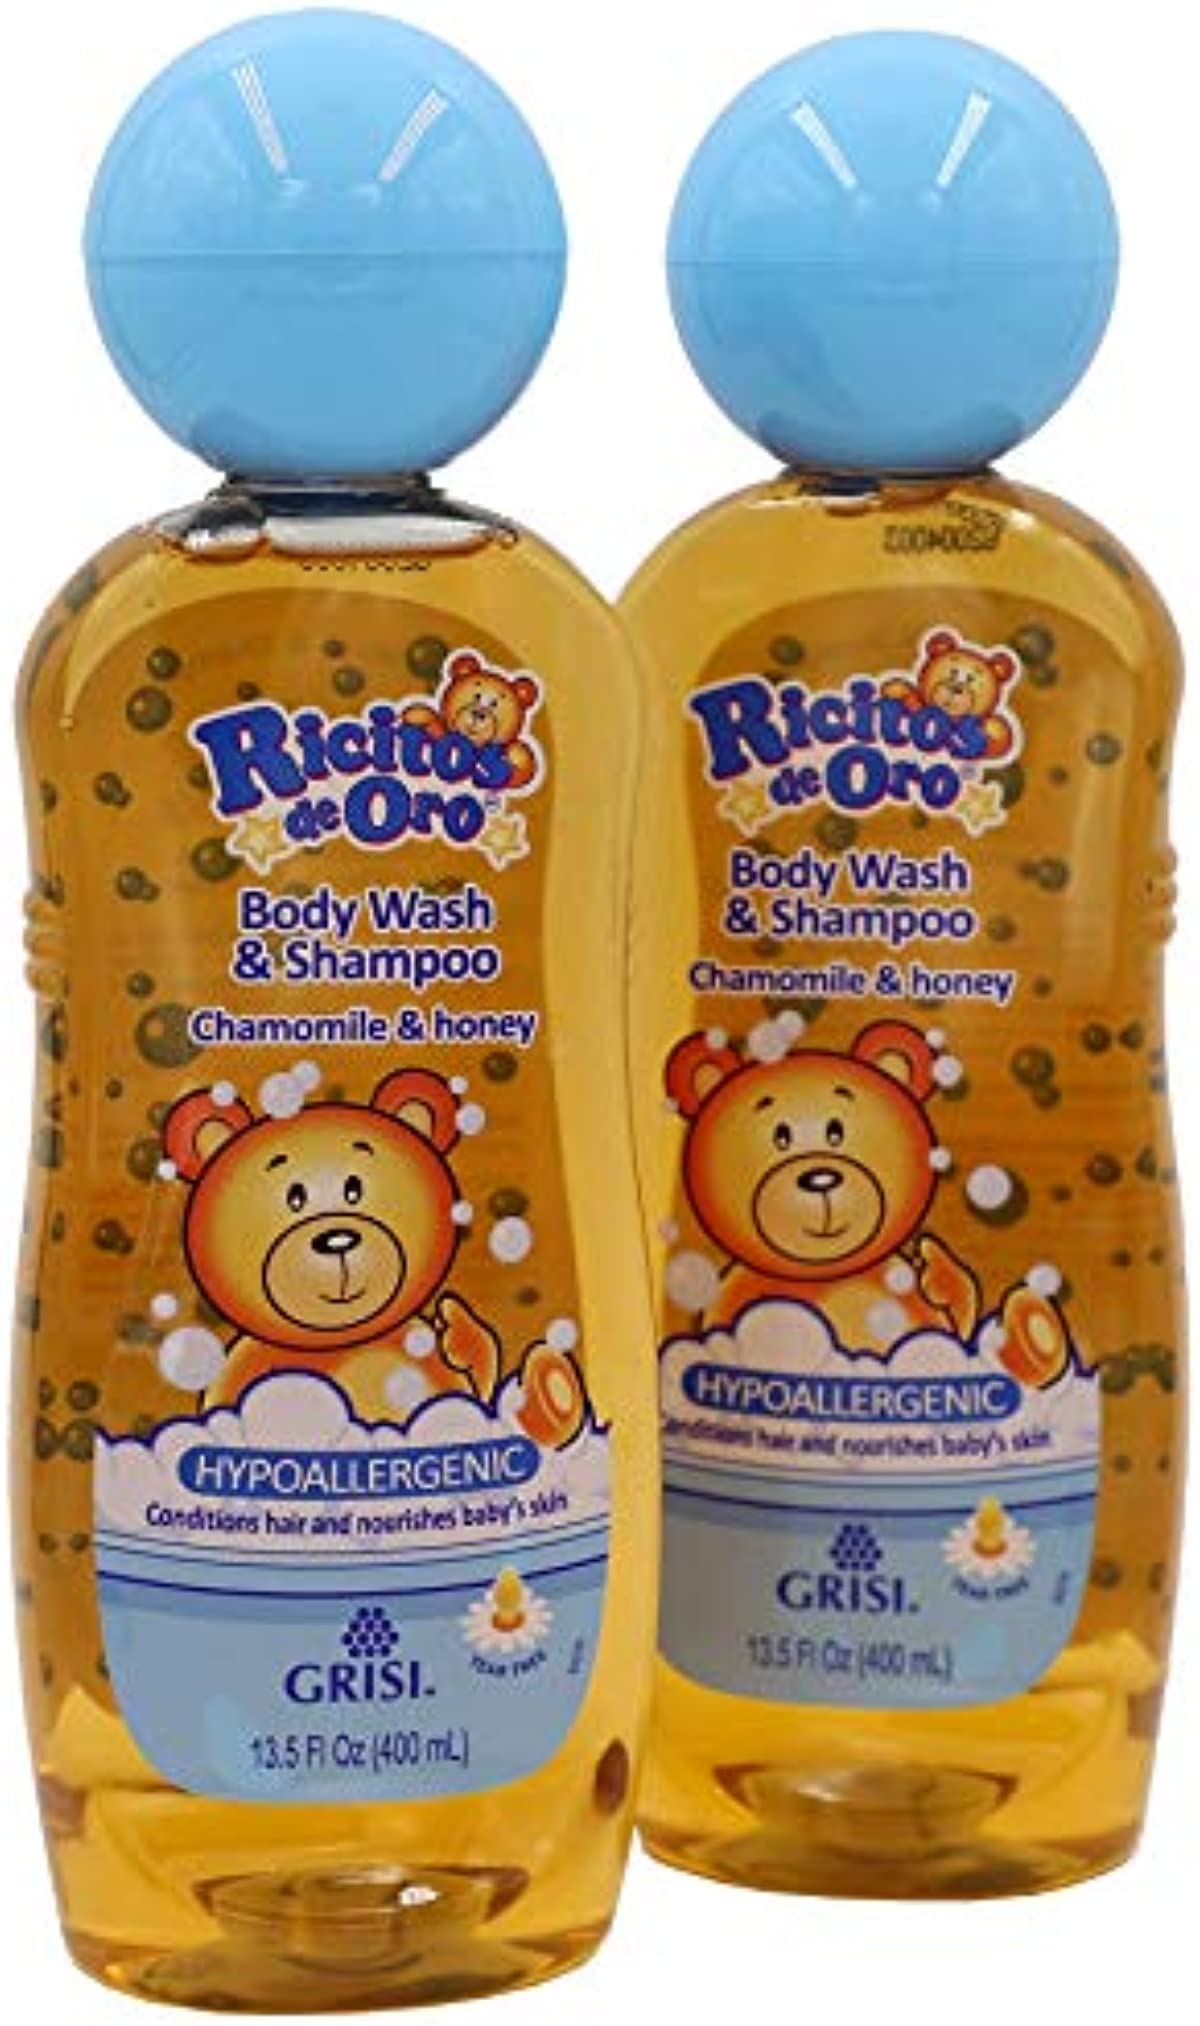 Ricitos de Oro 2-in-1 Baby Hair and Body Wash, Hypoallergenic Tear Free Body Wash and Shampoo with Chamomile and Honey, Cleansing Formula for Babies, 2-Pack of 13.5 FL Oz, Bottles., white